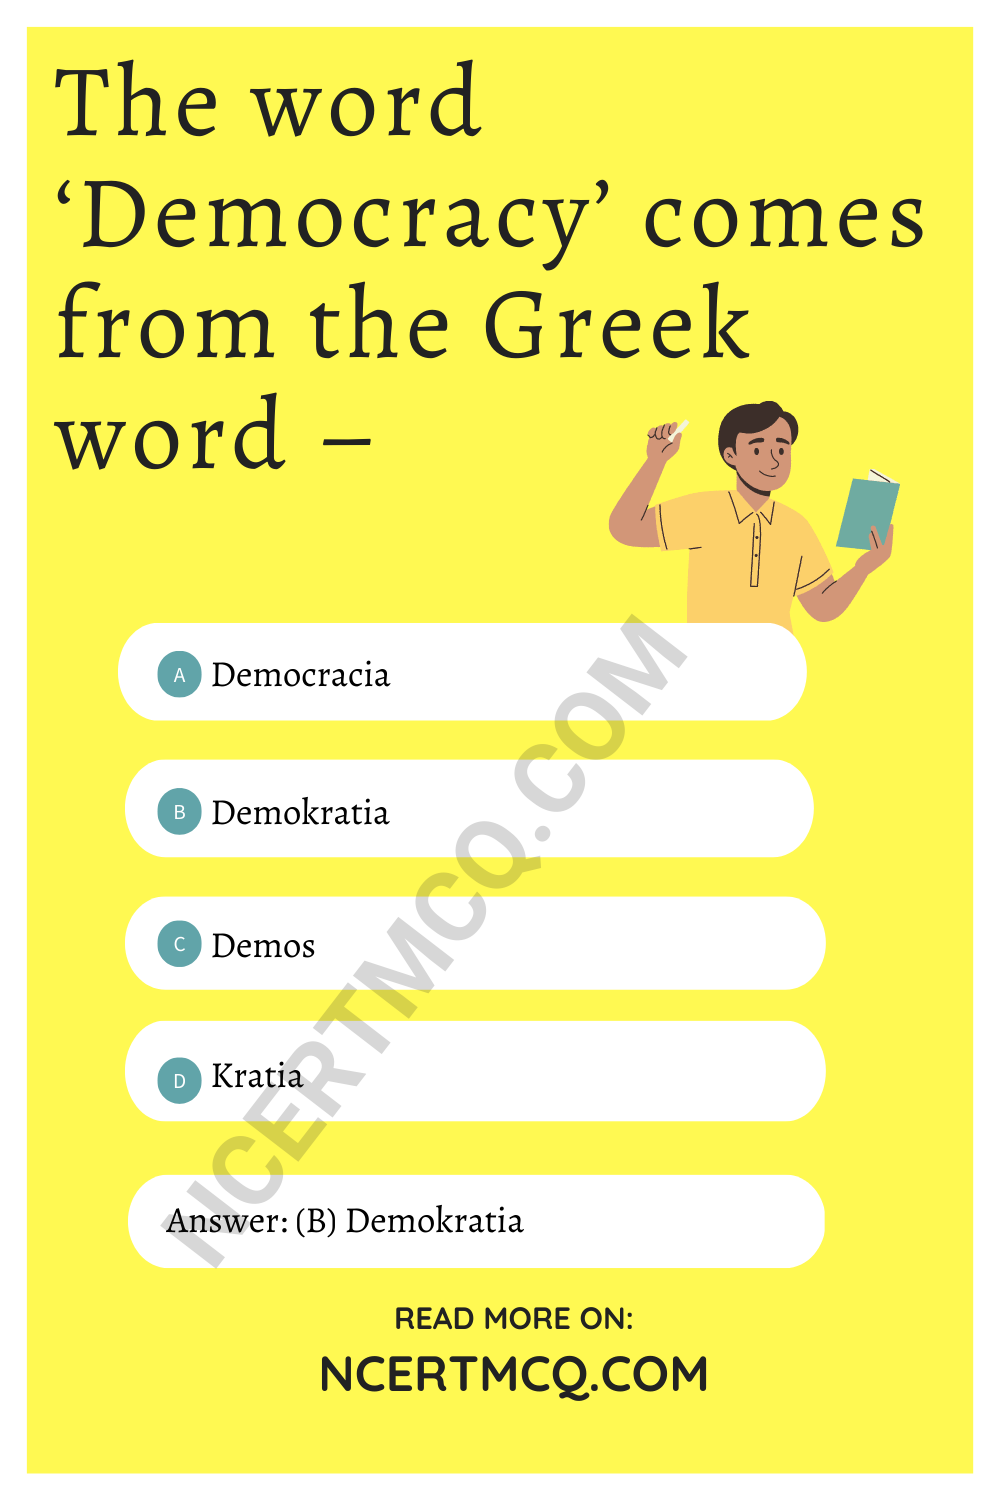 The word ‘Democracy’ comes from the Greek word –